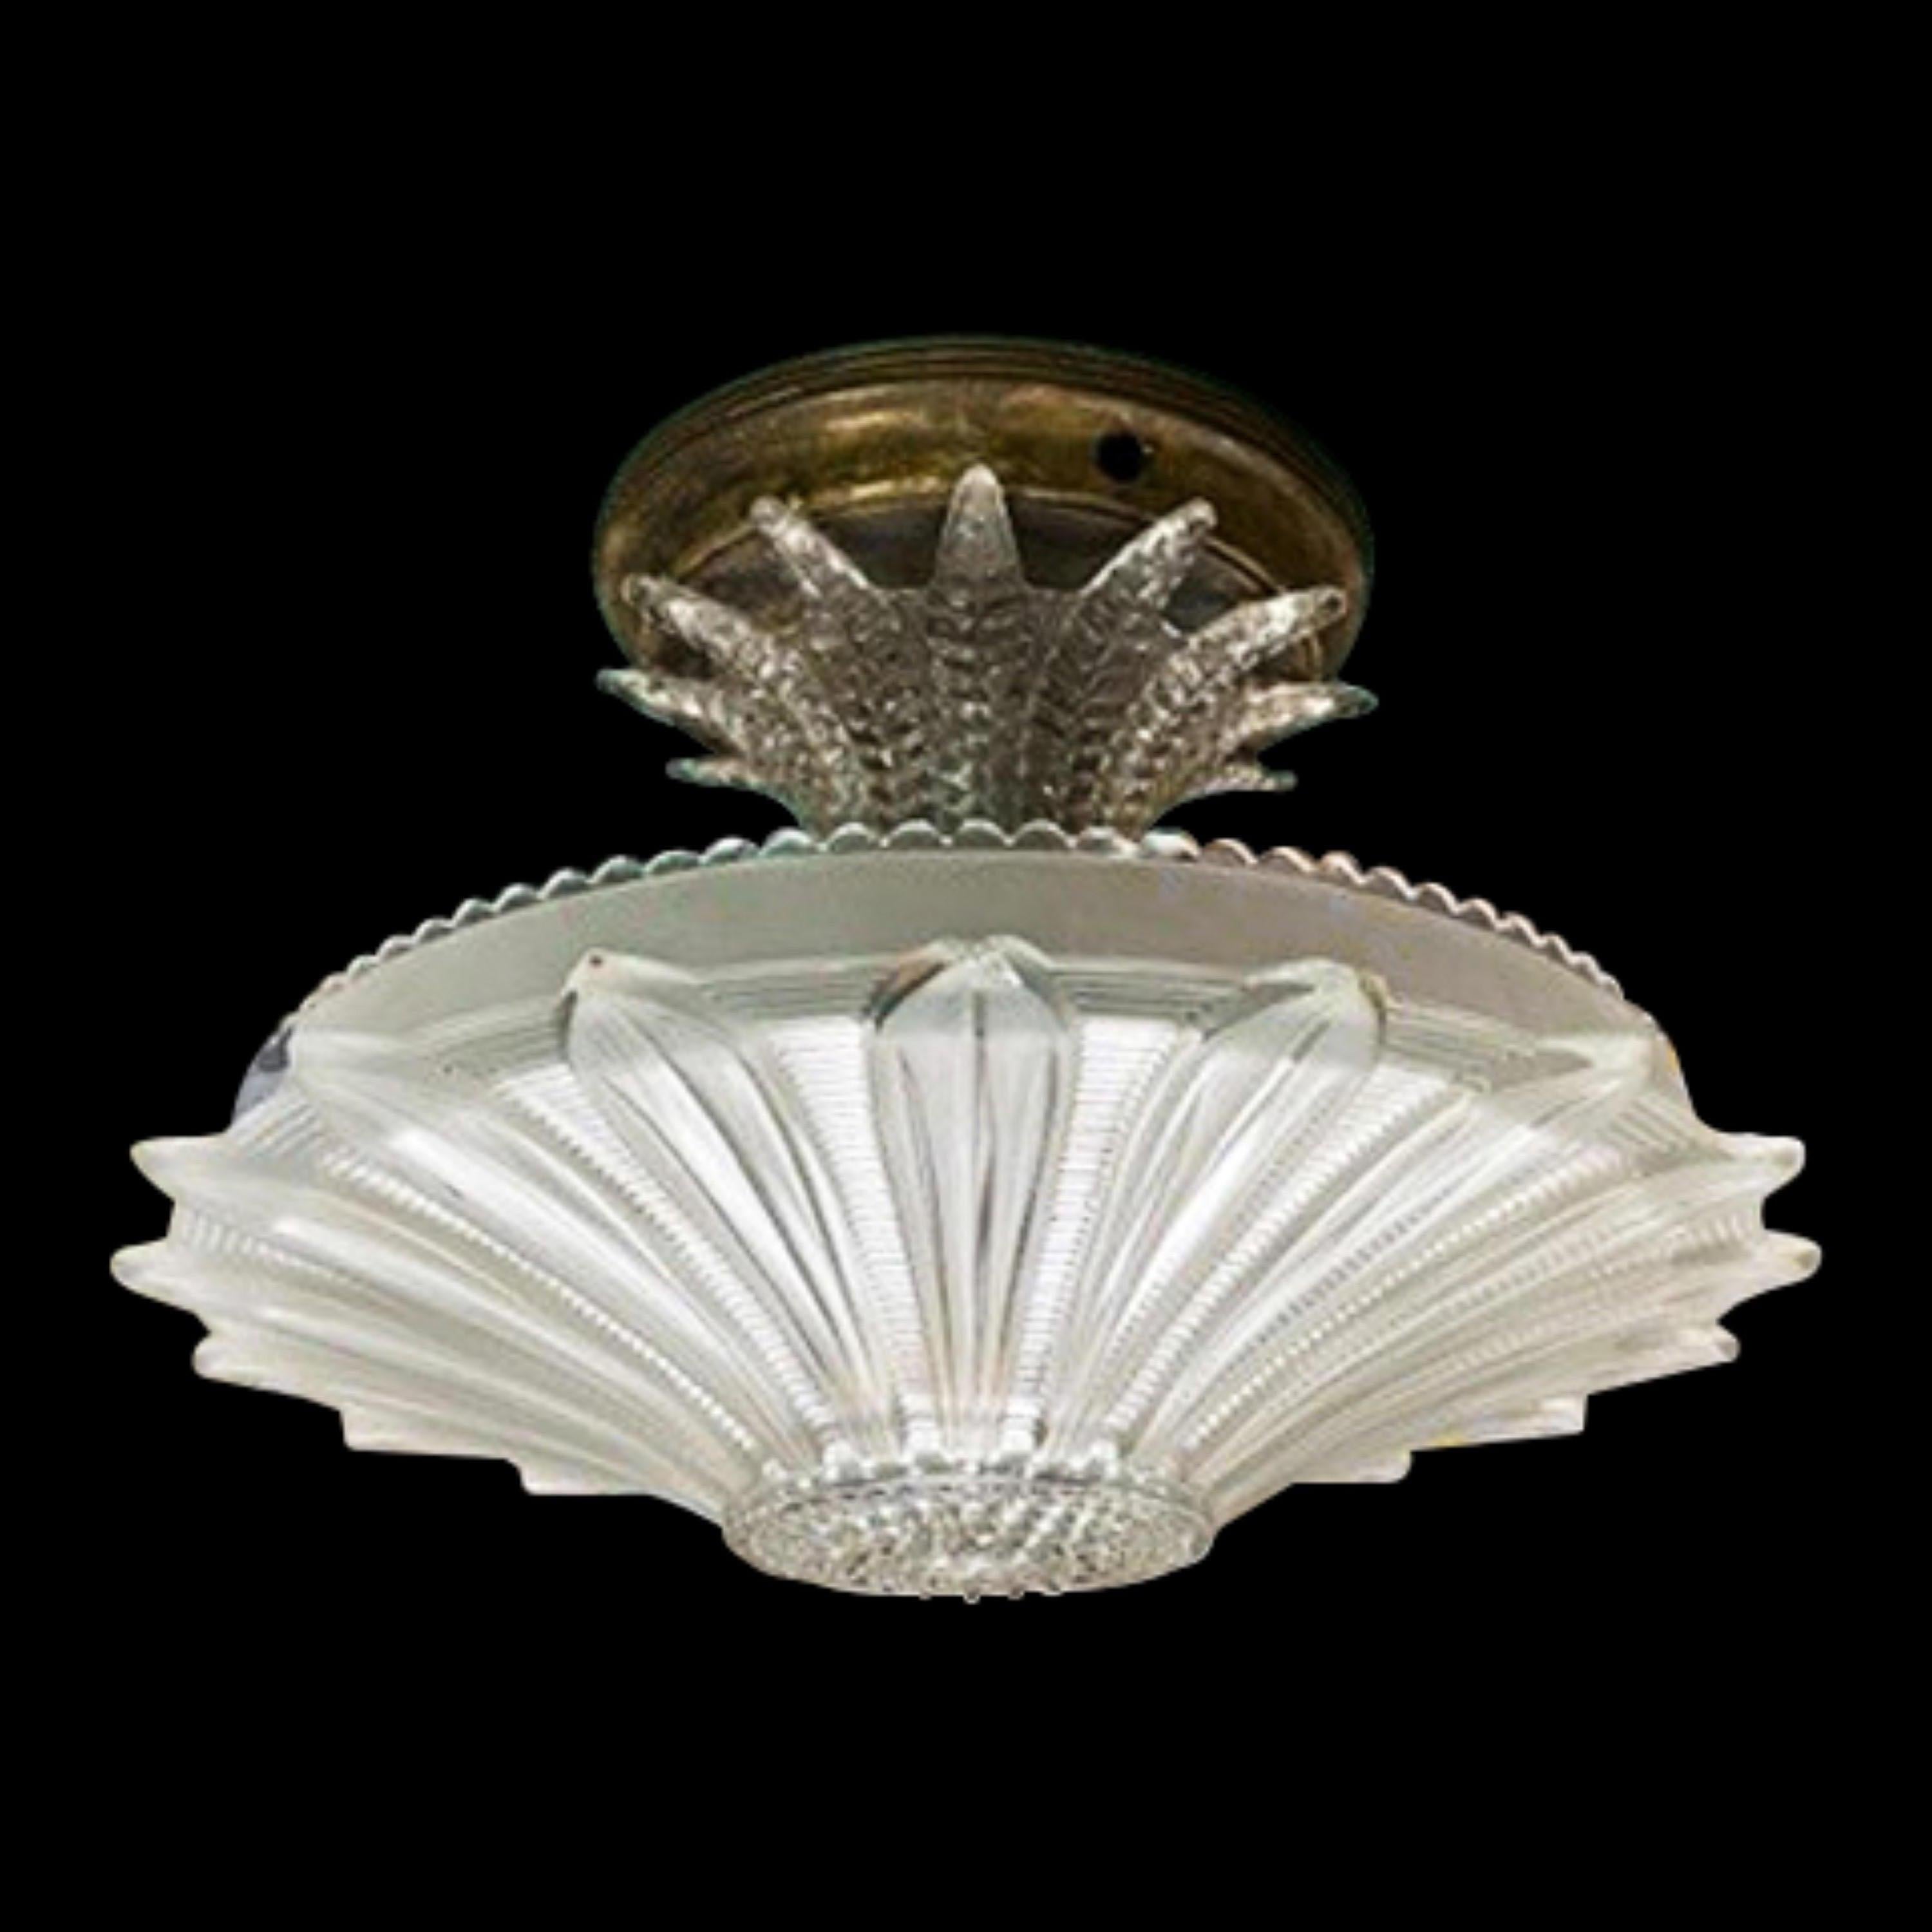 Early 20th century Victorian style semi flush cast clear and frosted glass dish light. Features floral leaf details. Five sockets for plenty of light. Cleaned and restored. One minor chip in the glass. Please see images. The price includes